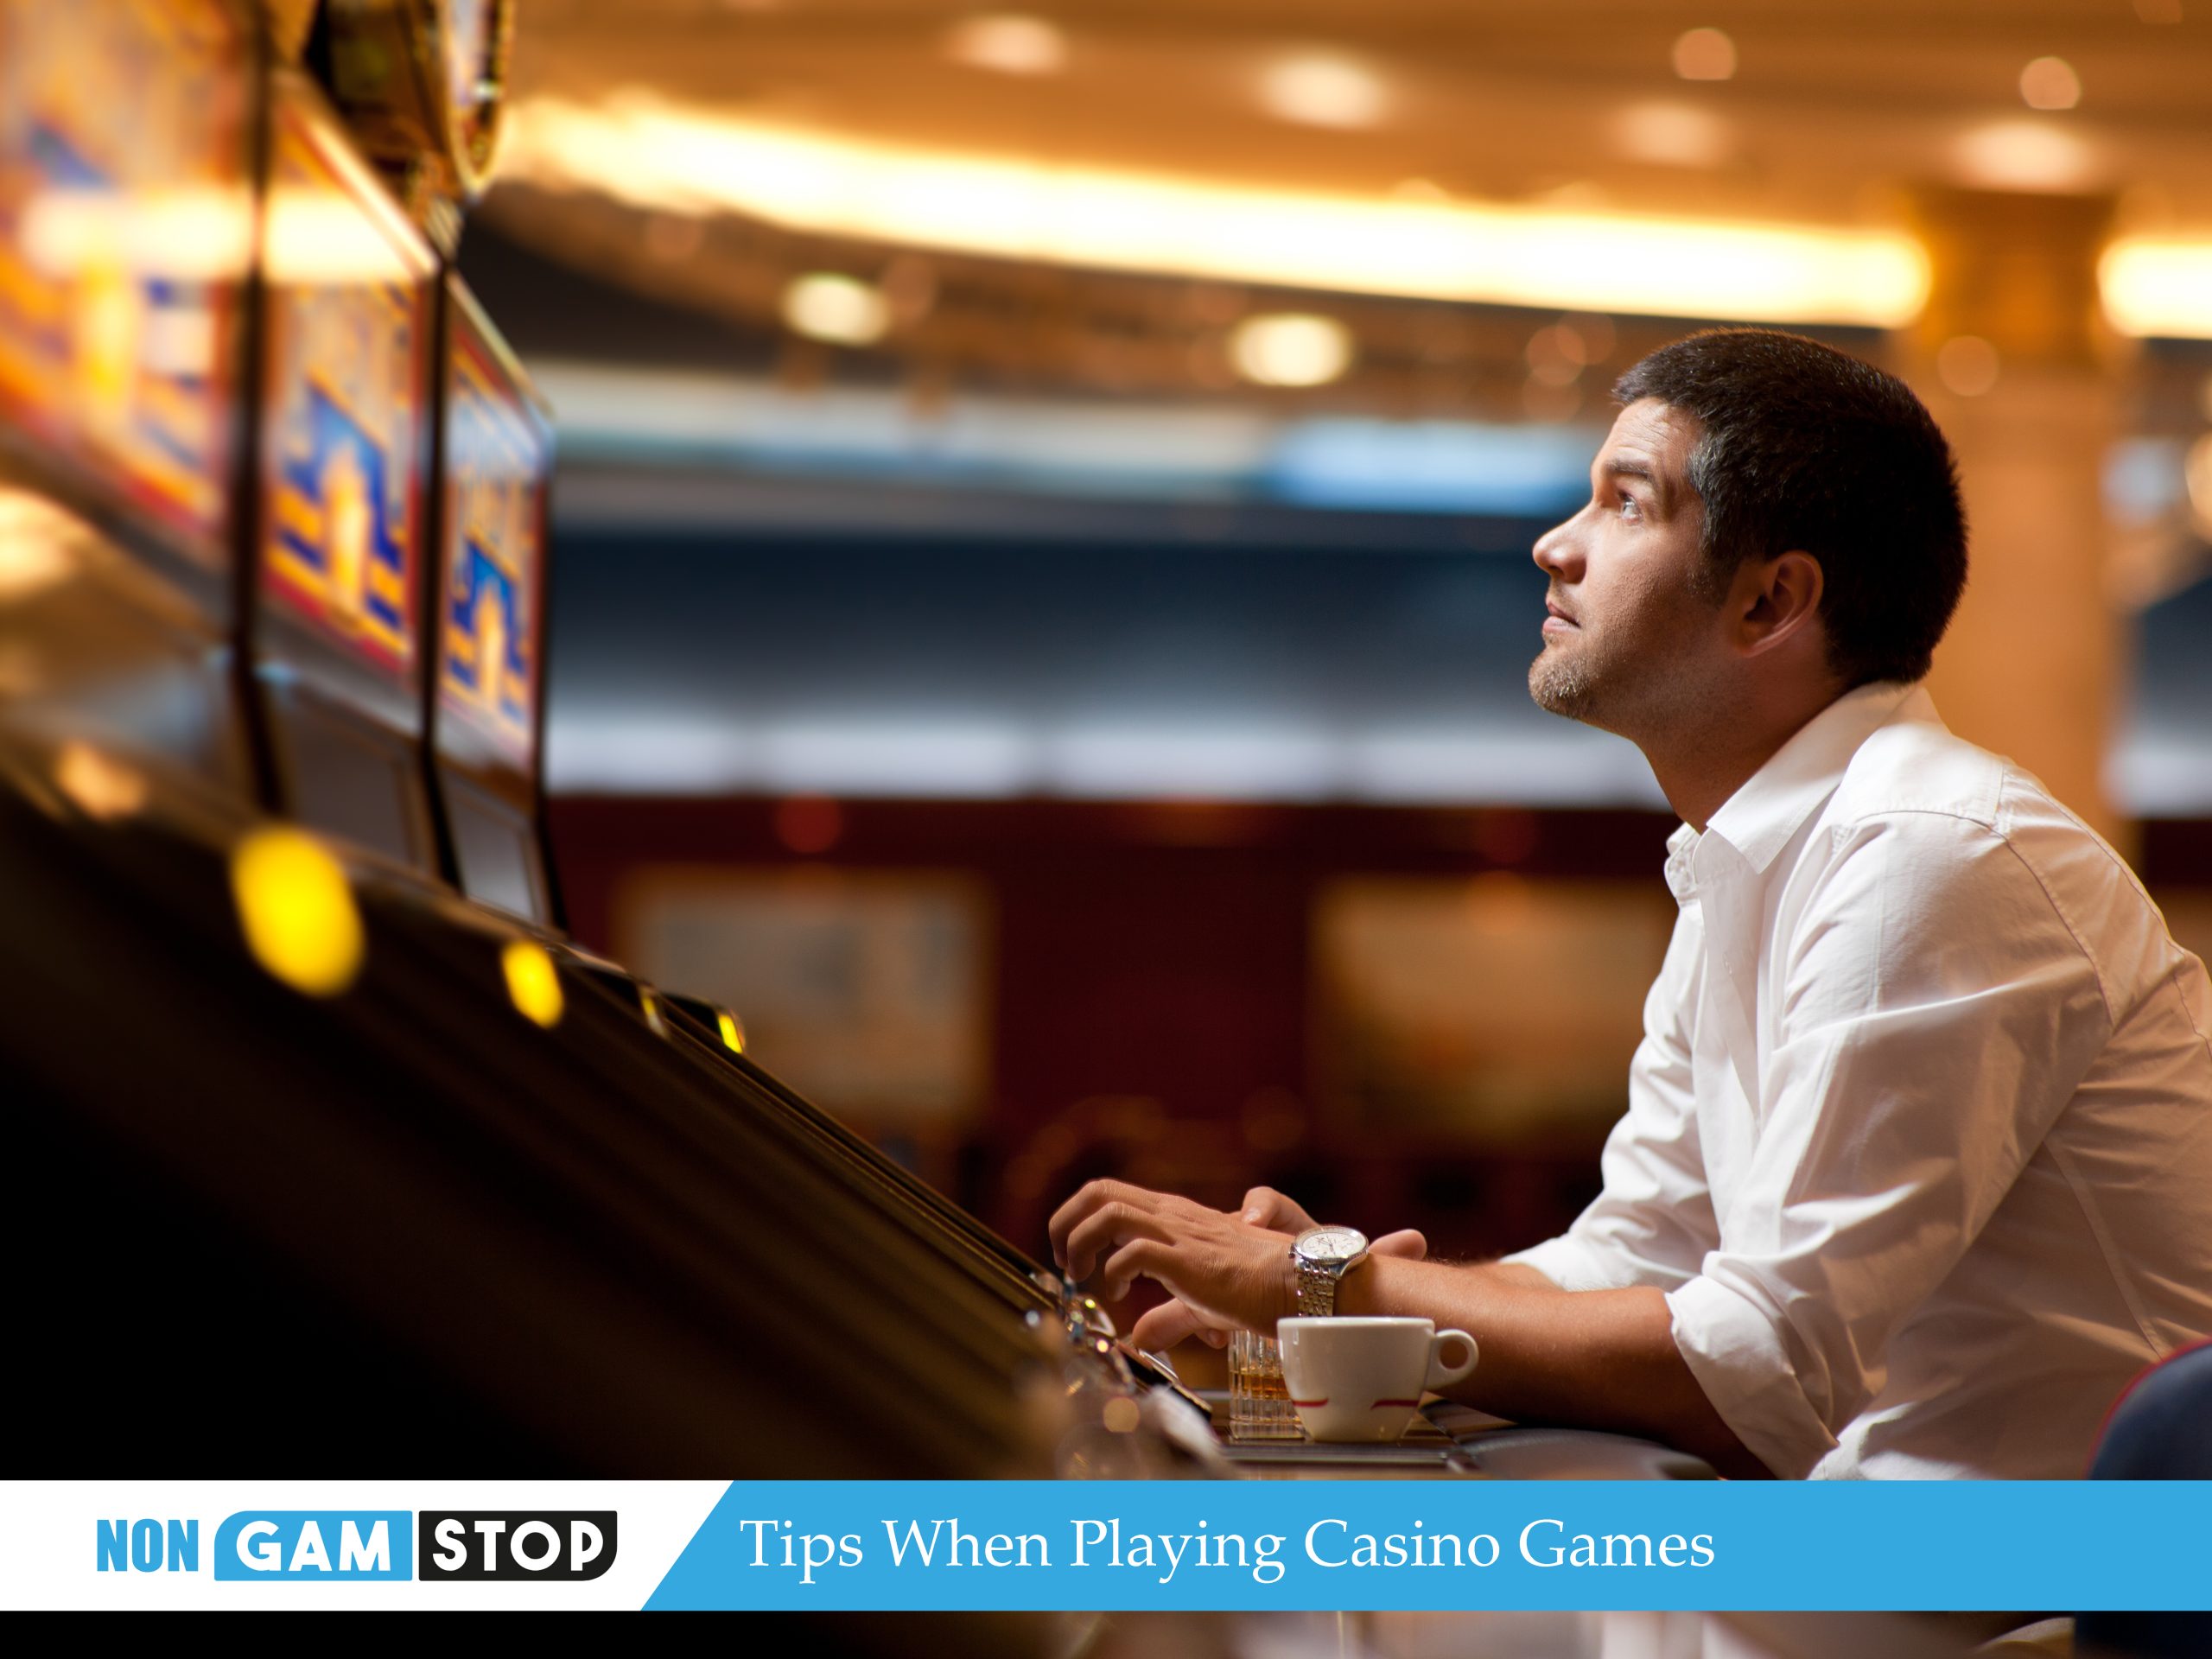 Tips When Playing Casino Games